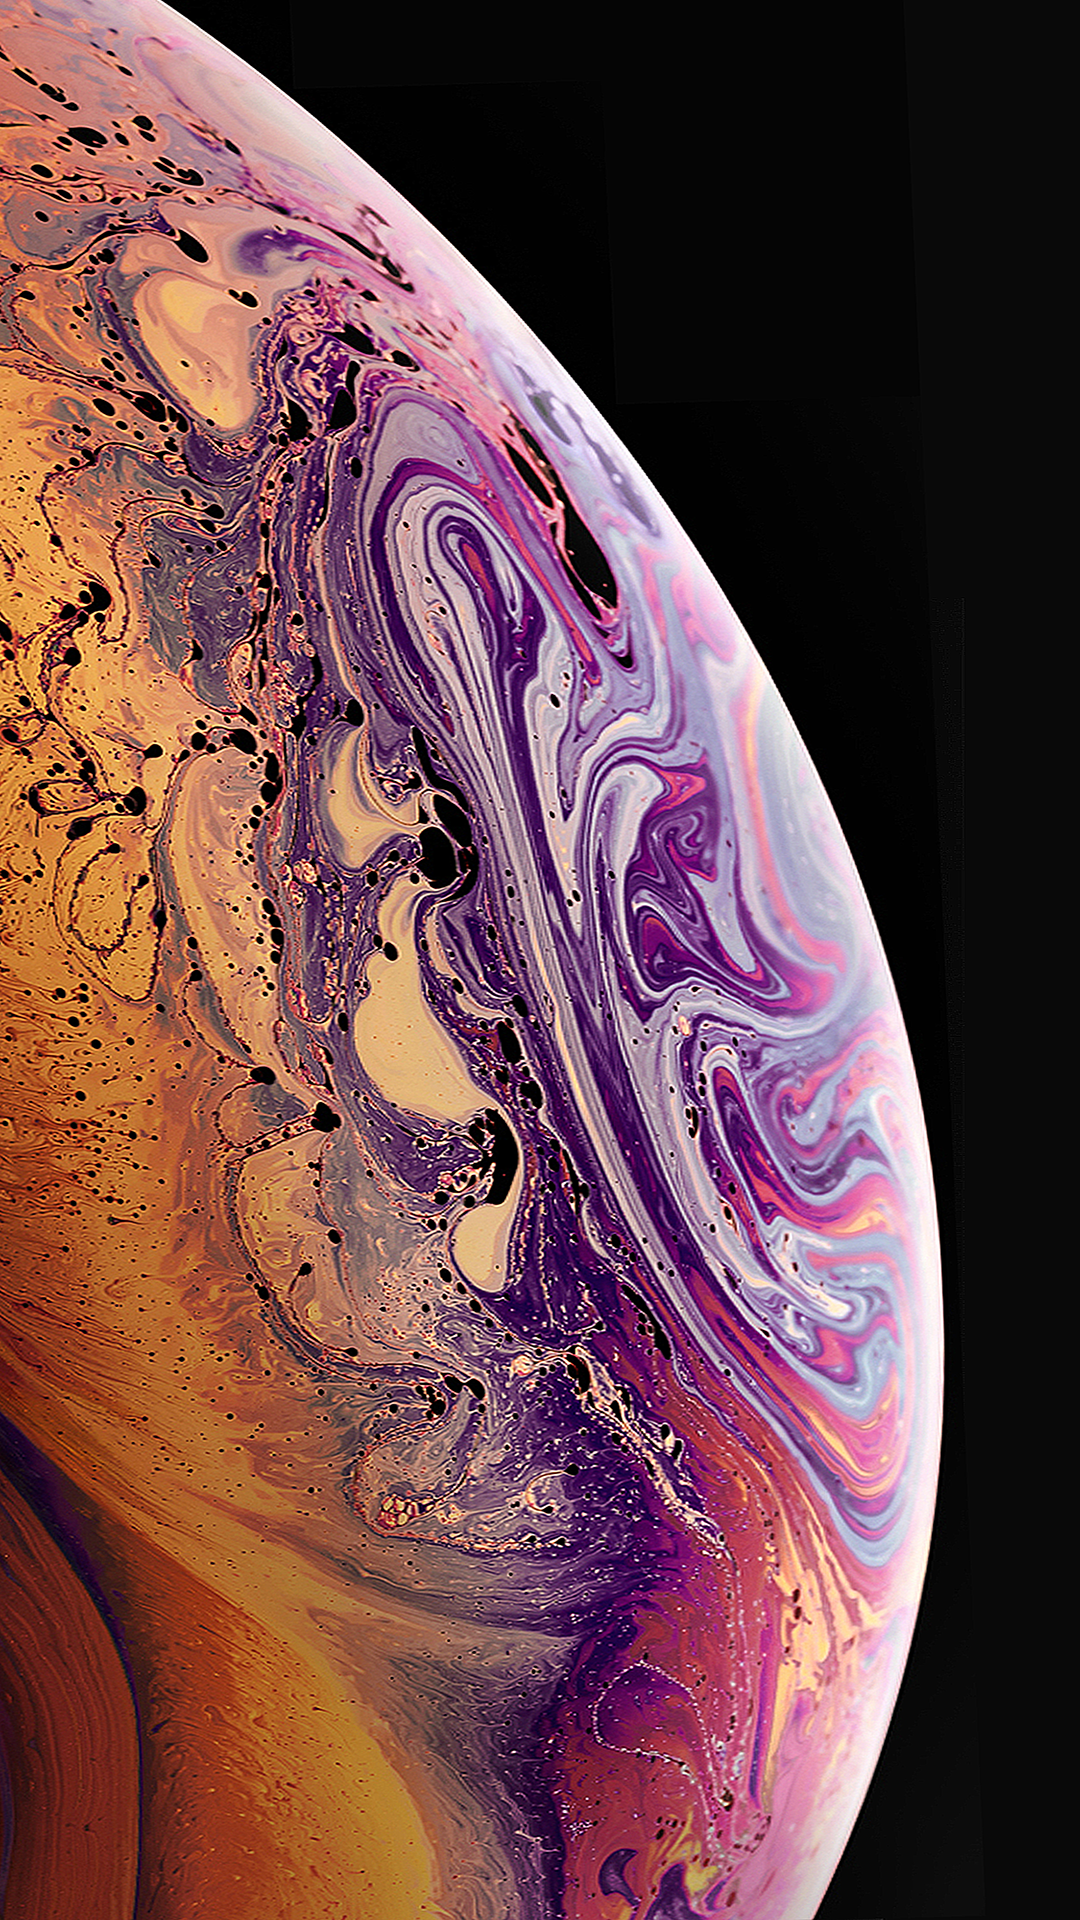 iOS 12 Wallpapers for iPhone Xs Xs Max and Xr By ispazio and